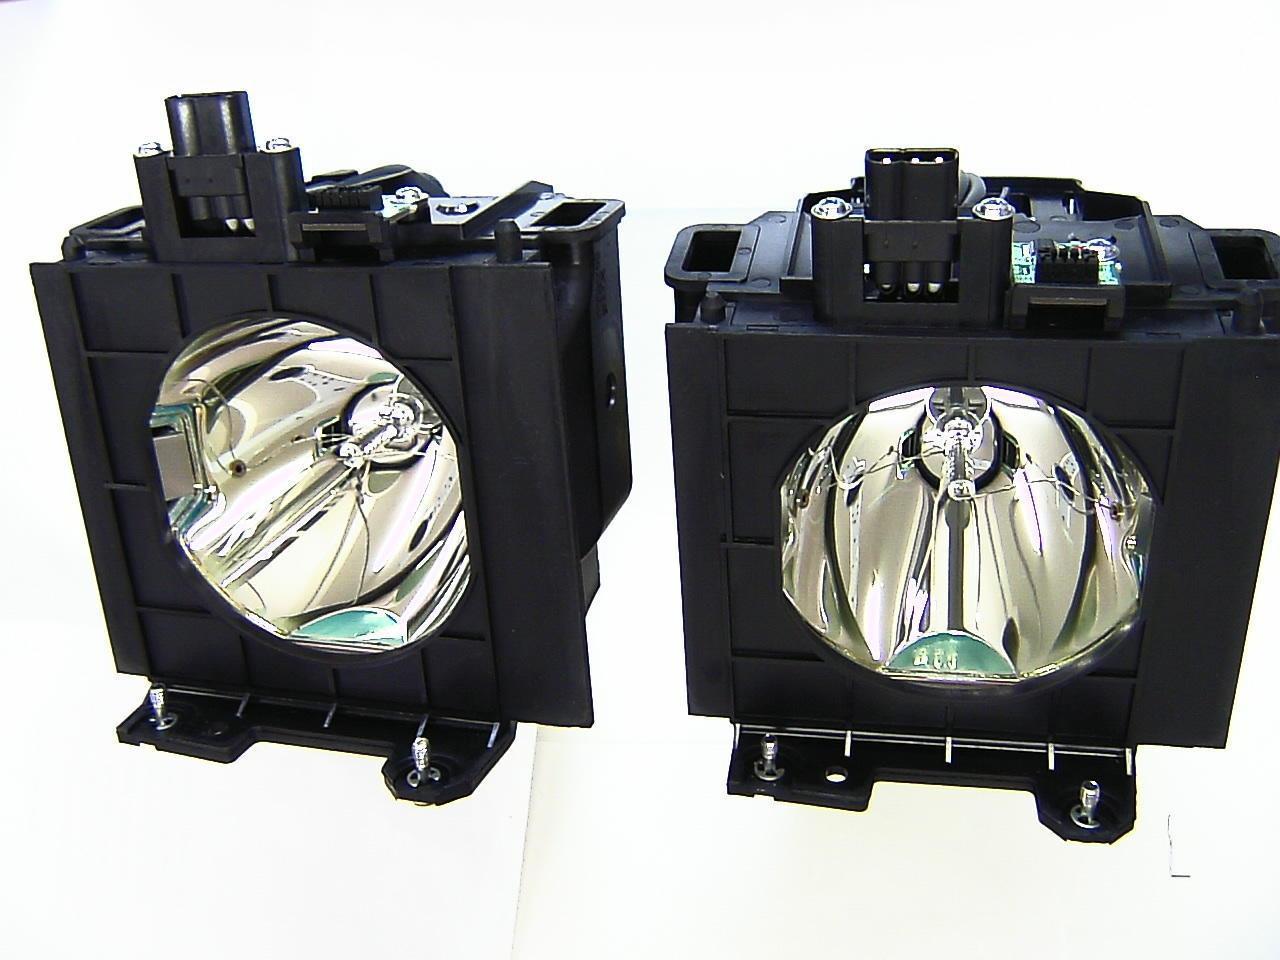 PT-D5700EL Panasonic Twin-Pack Projector Lamp Replacement (contains two lamps). Projector Lamp Assembly with High Quality OEM C